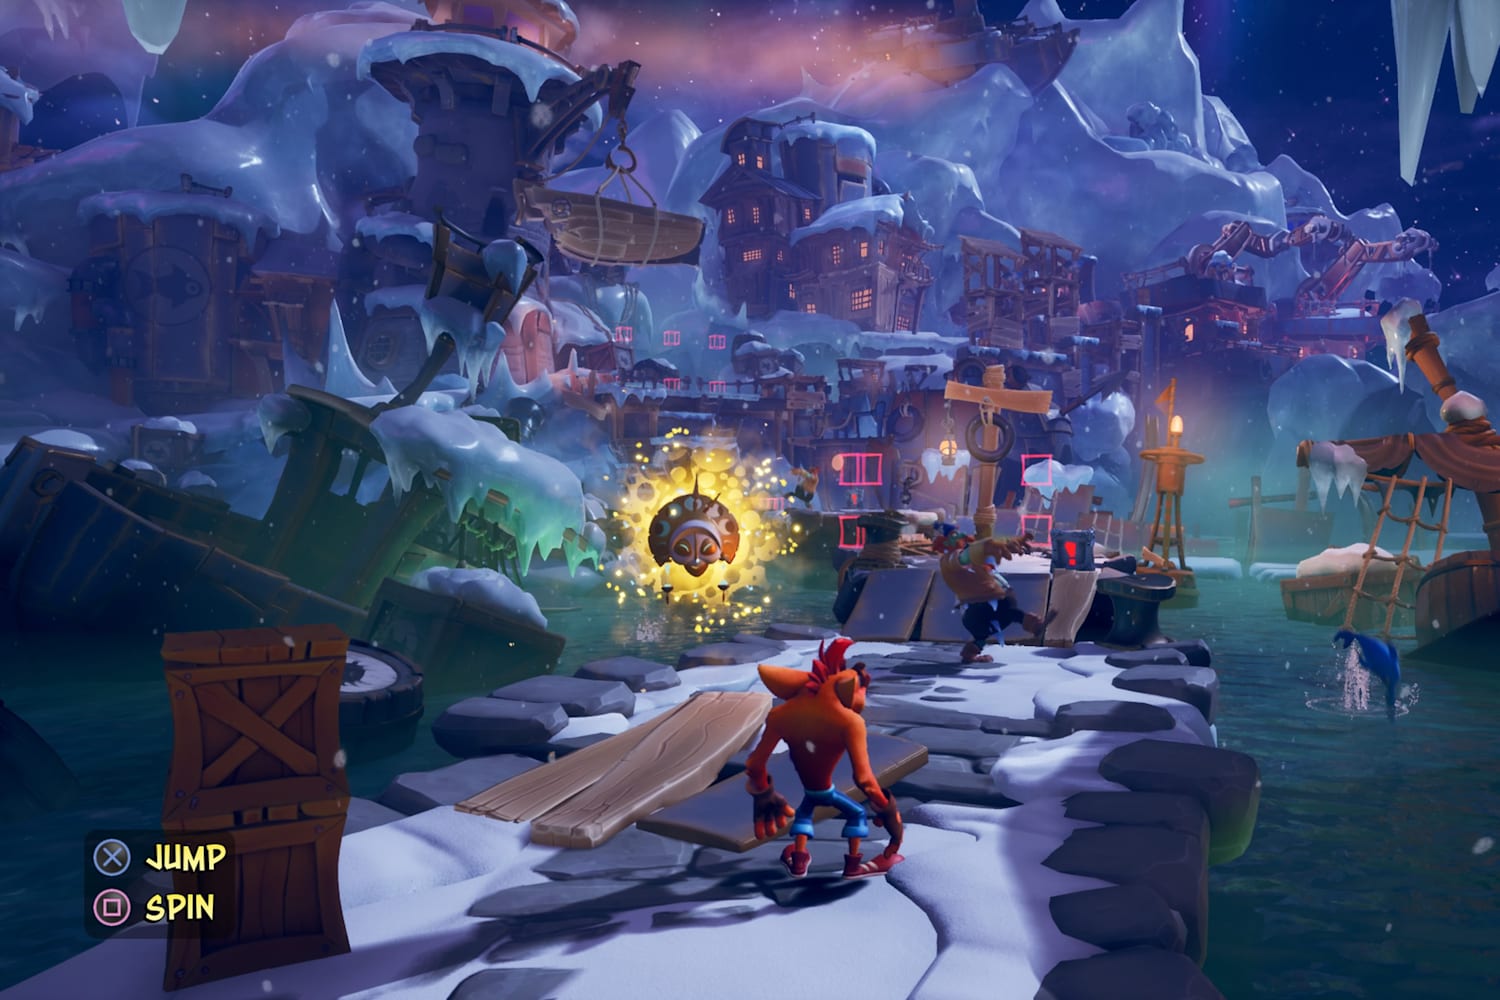 A new Crash Bandicoot game? It’s about time...